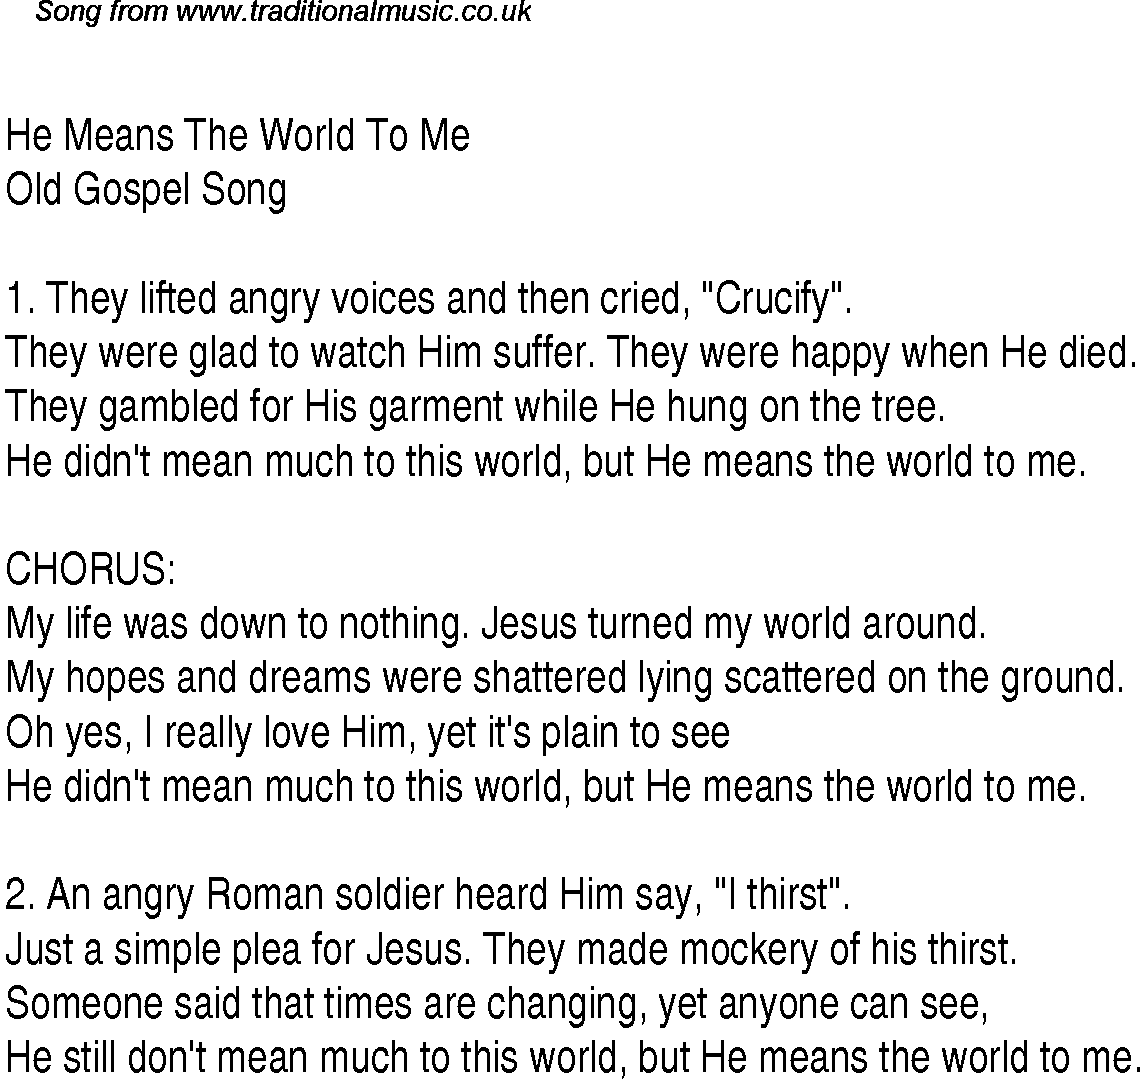 Gospel Song: he-means-the-world-to-me, lyrics and chords.